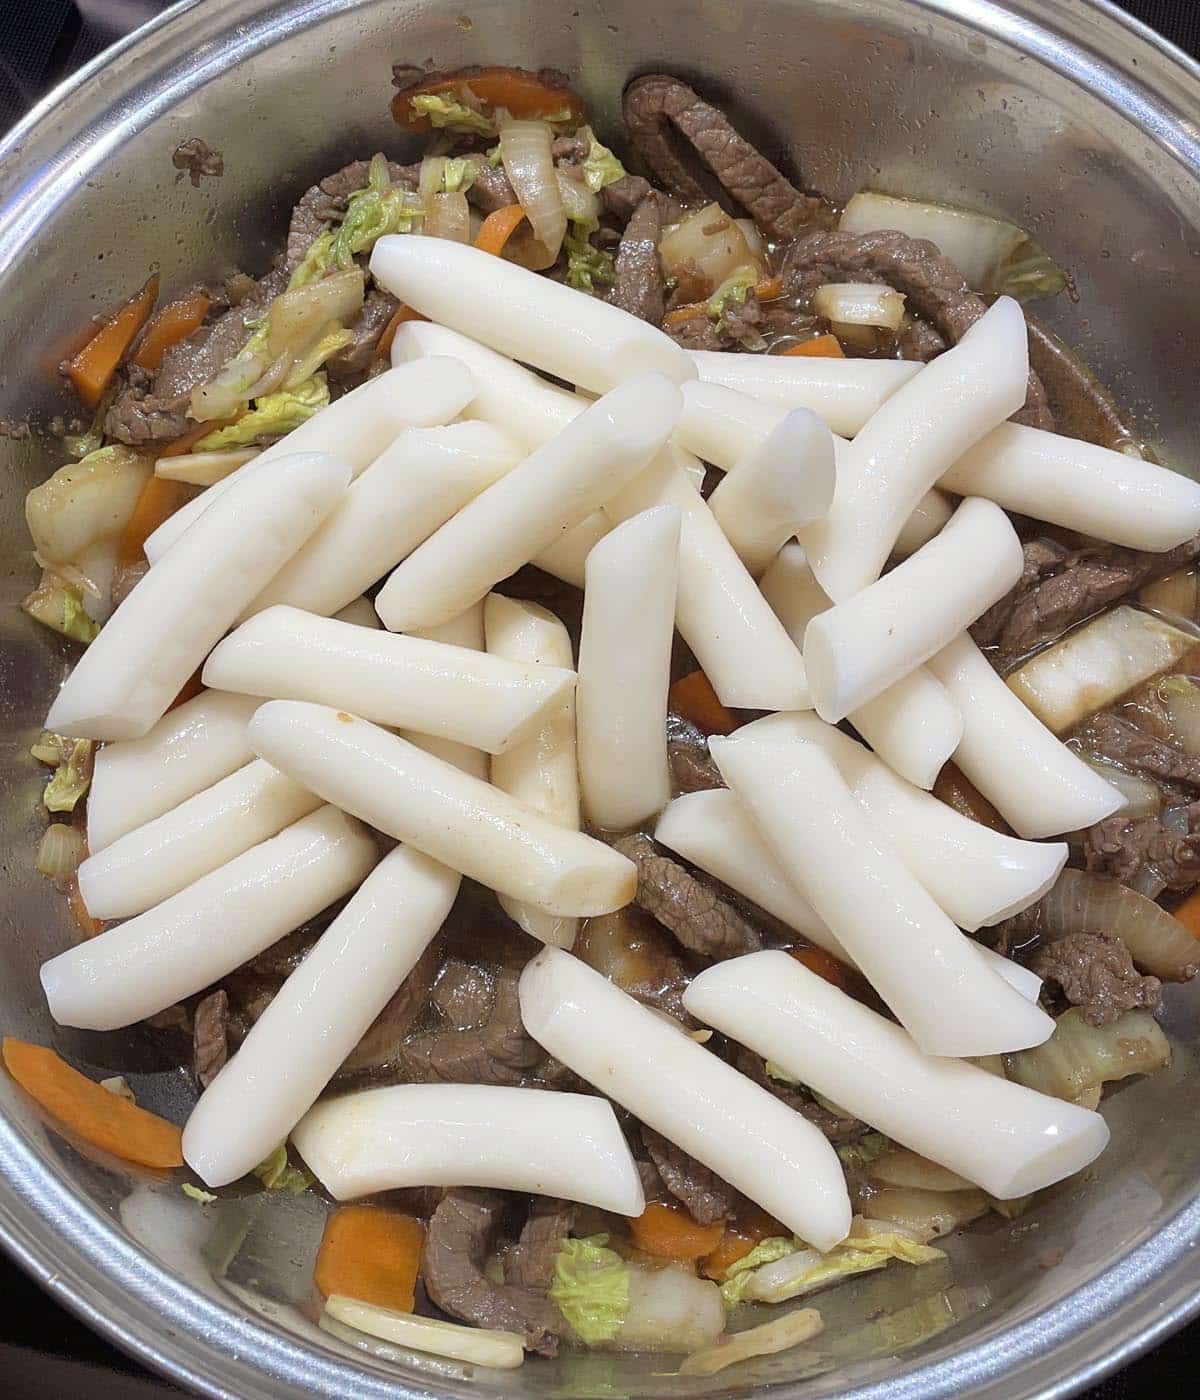 White cylinder shaped rice cakes in a metal pan containing cooked meat and vegetables.